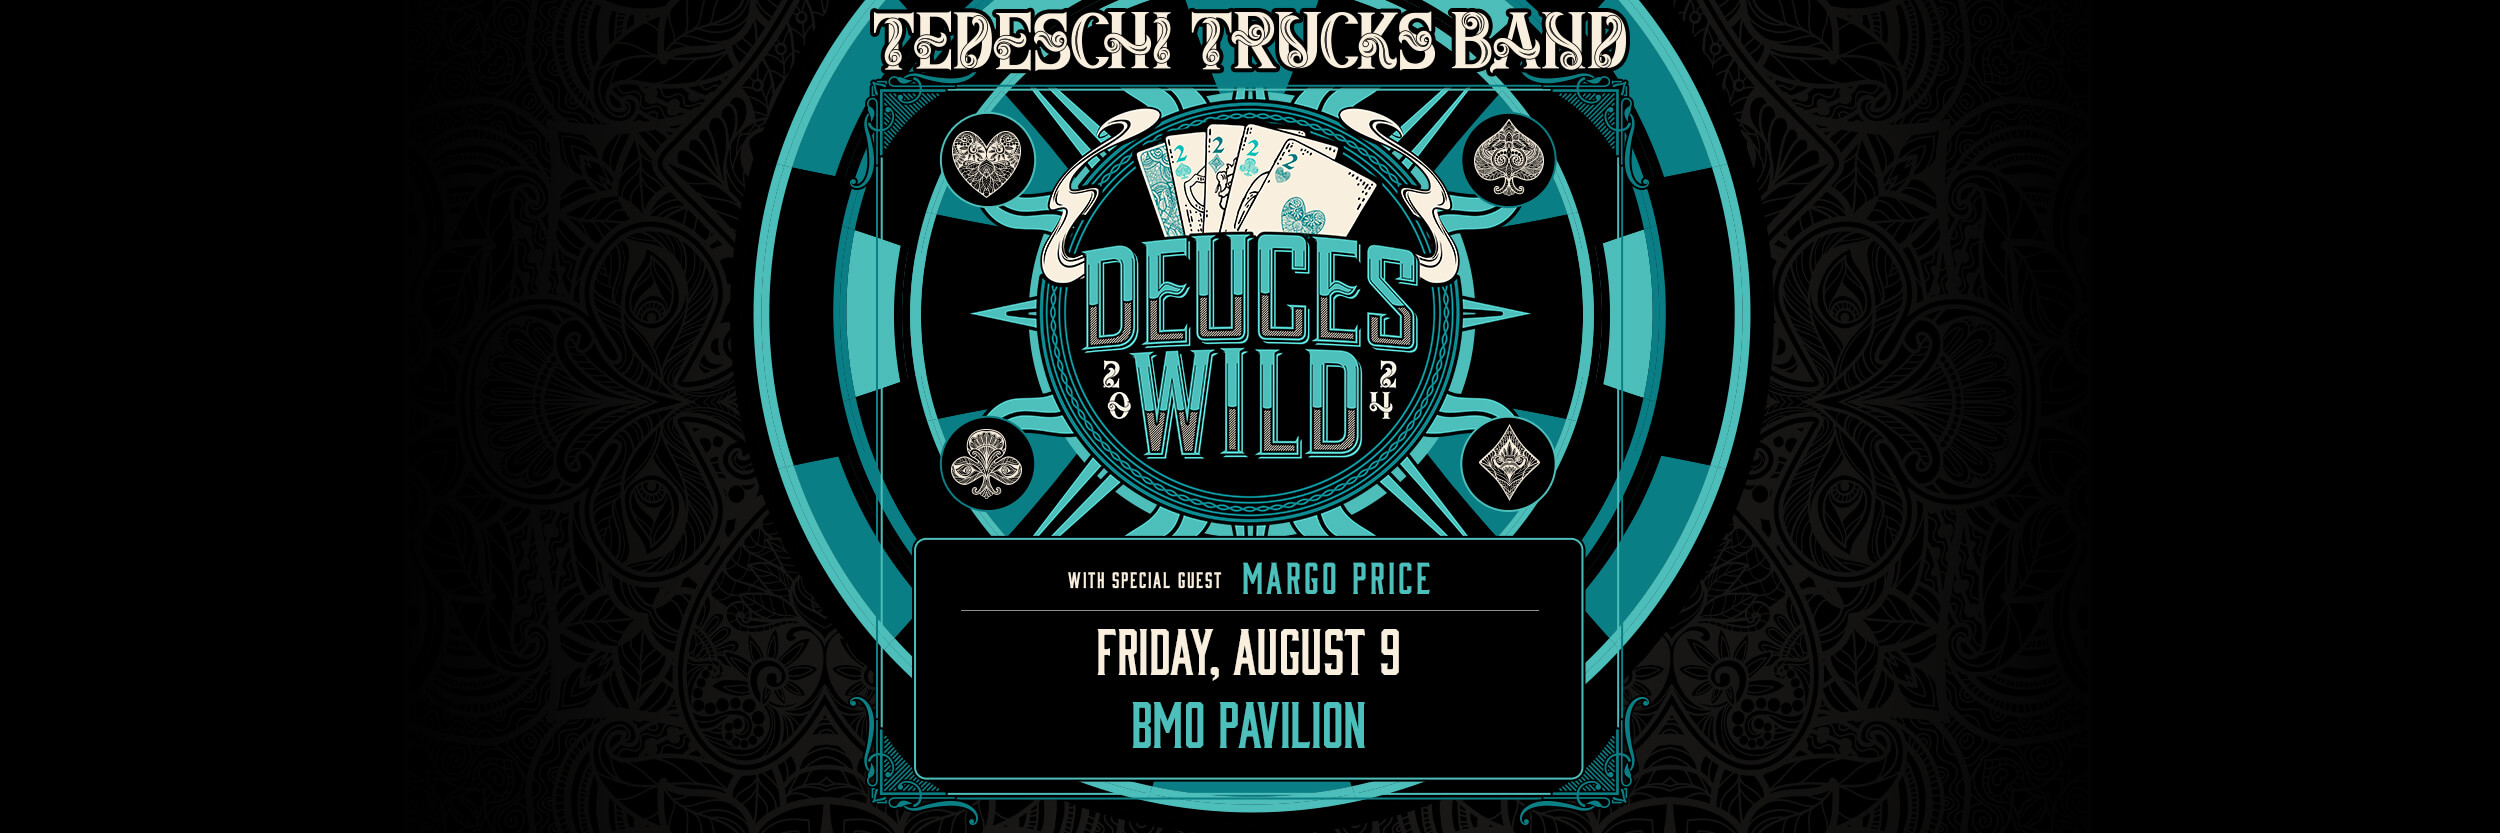 Tedeschi Trucks Band with speical guest Margo Price at BMO Pavilion